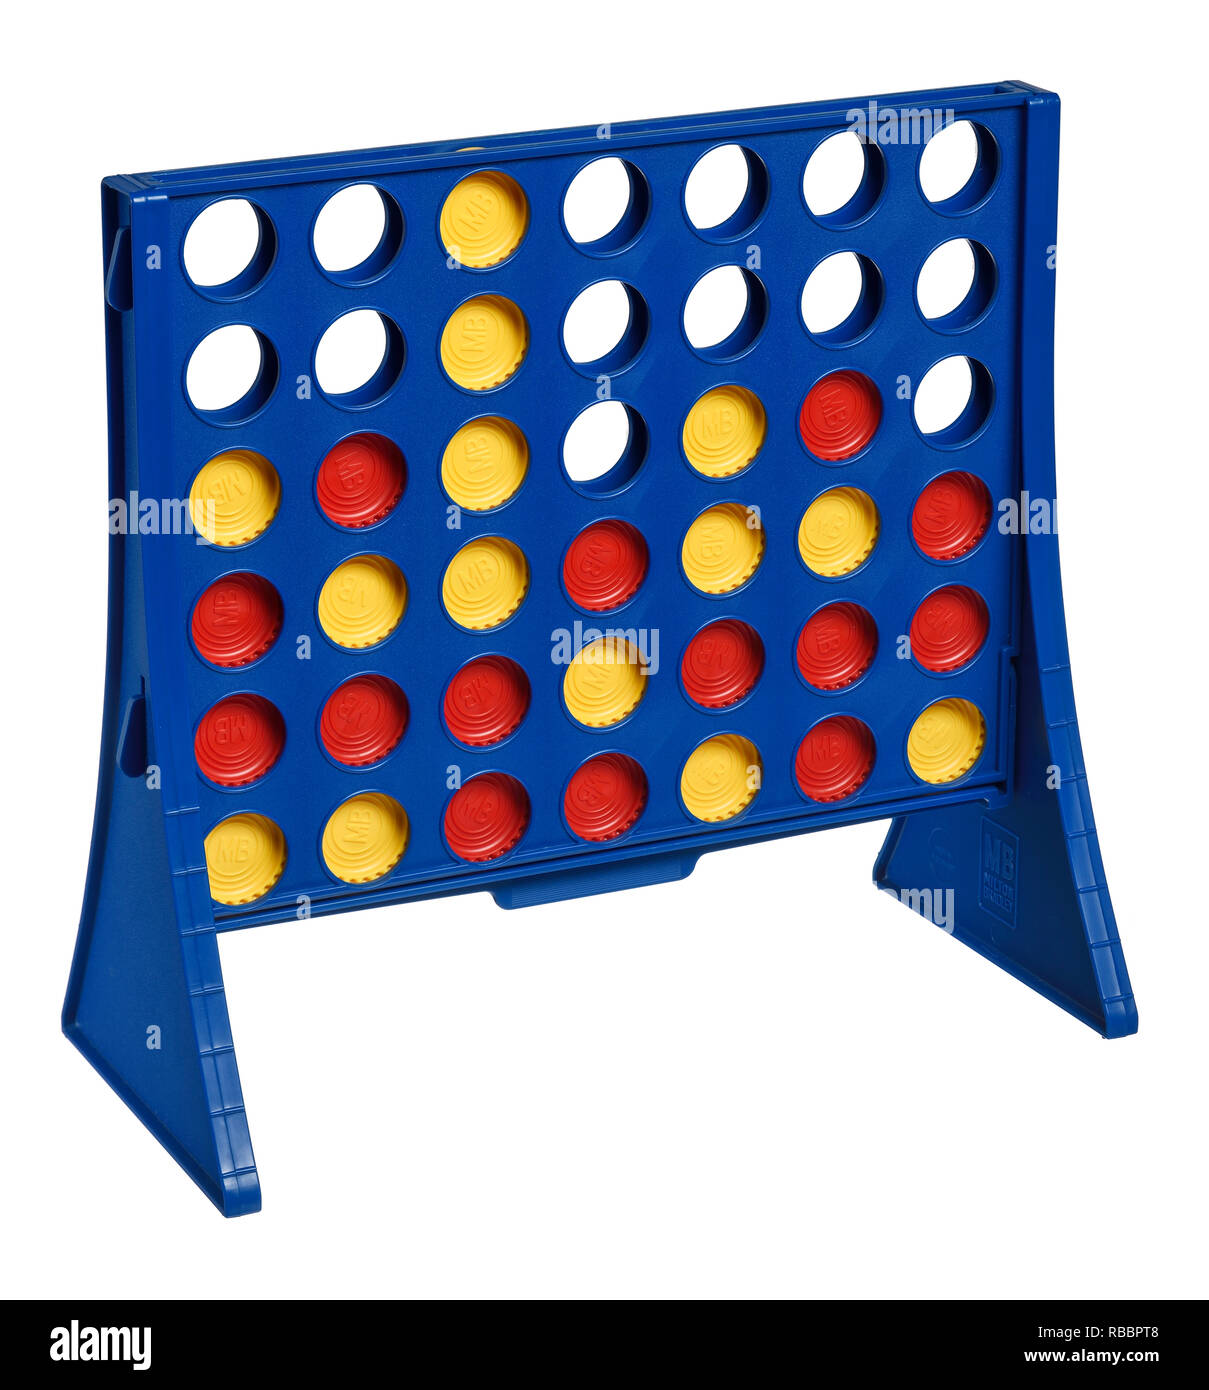 The blue plastic playing frame for the game of Connect4 Stock Photo